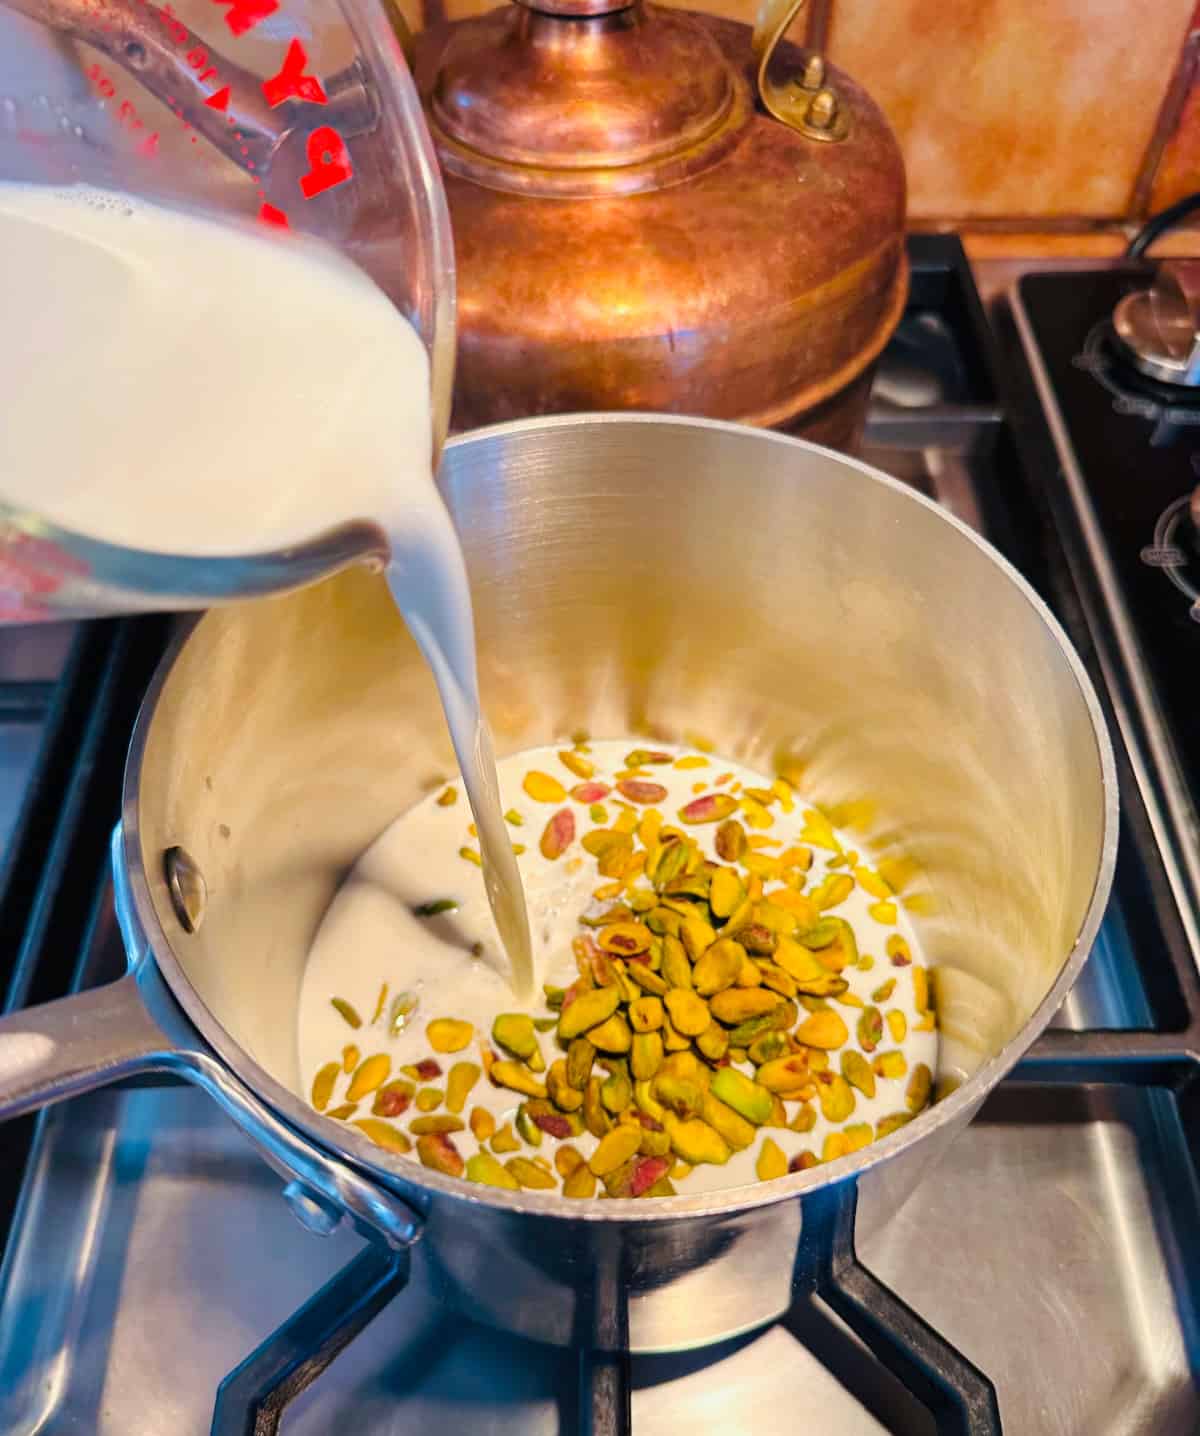 Half & half being poured from a glass measuring cup into a small steel saucepan full of pistachio nuts sitting on the stove.